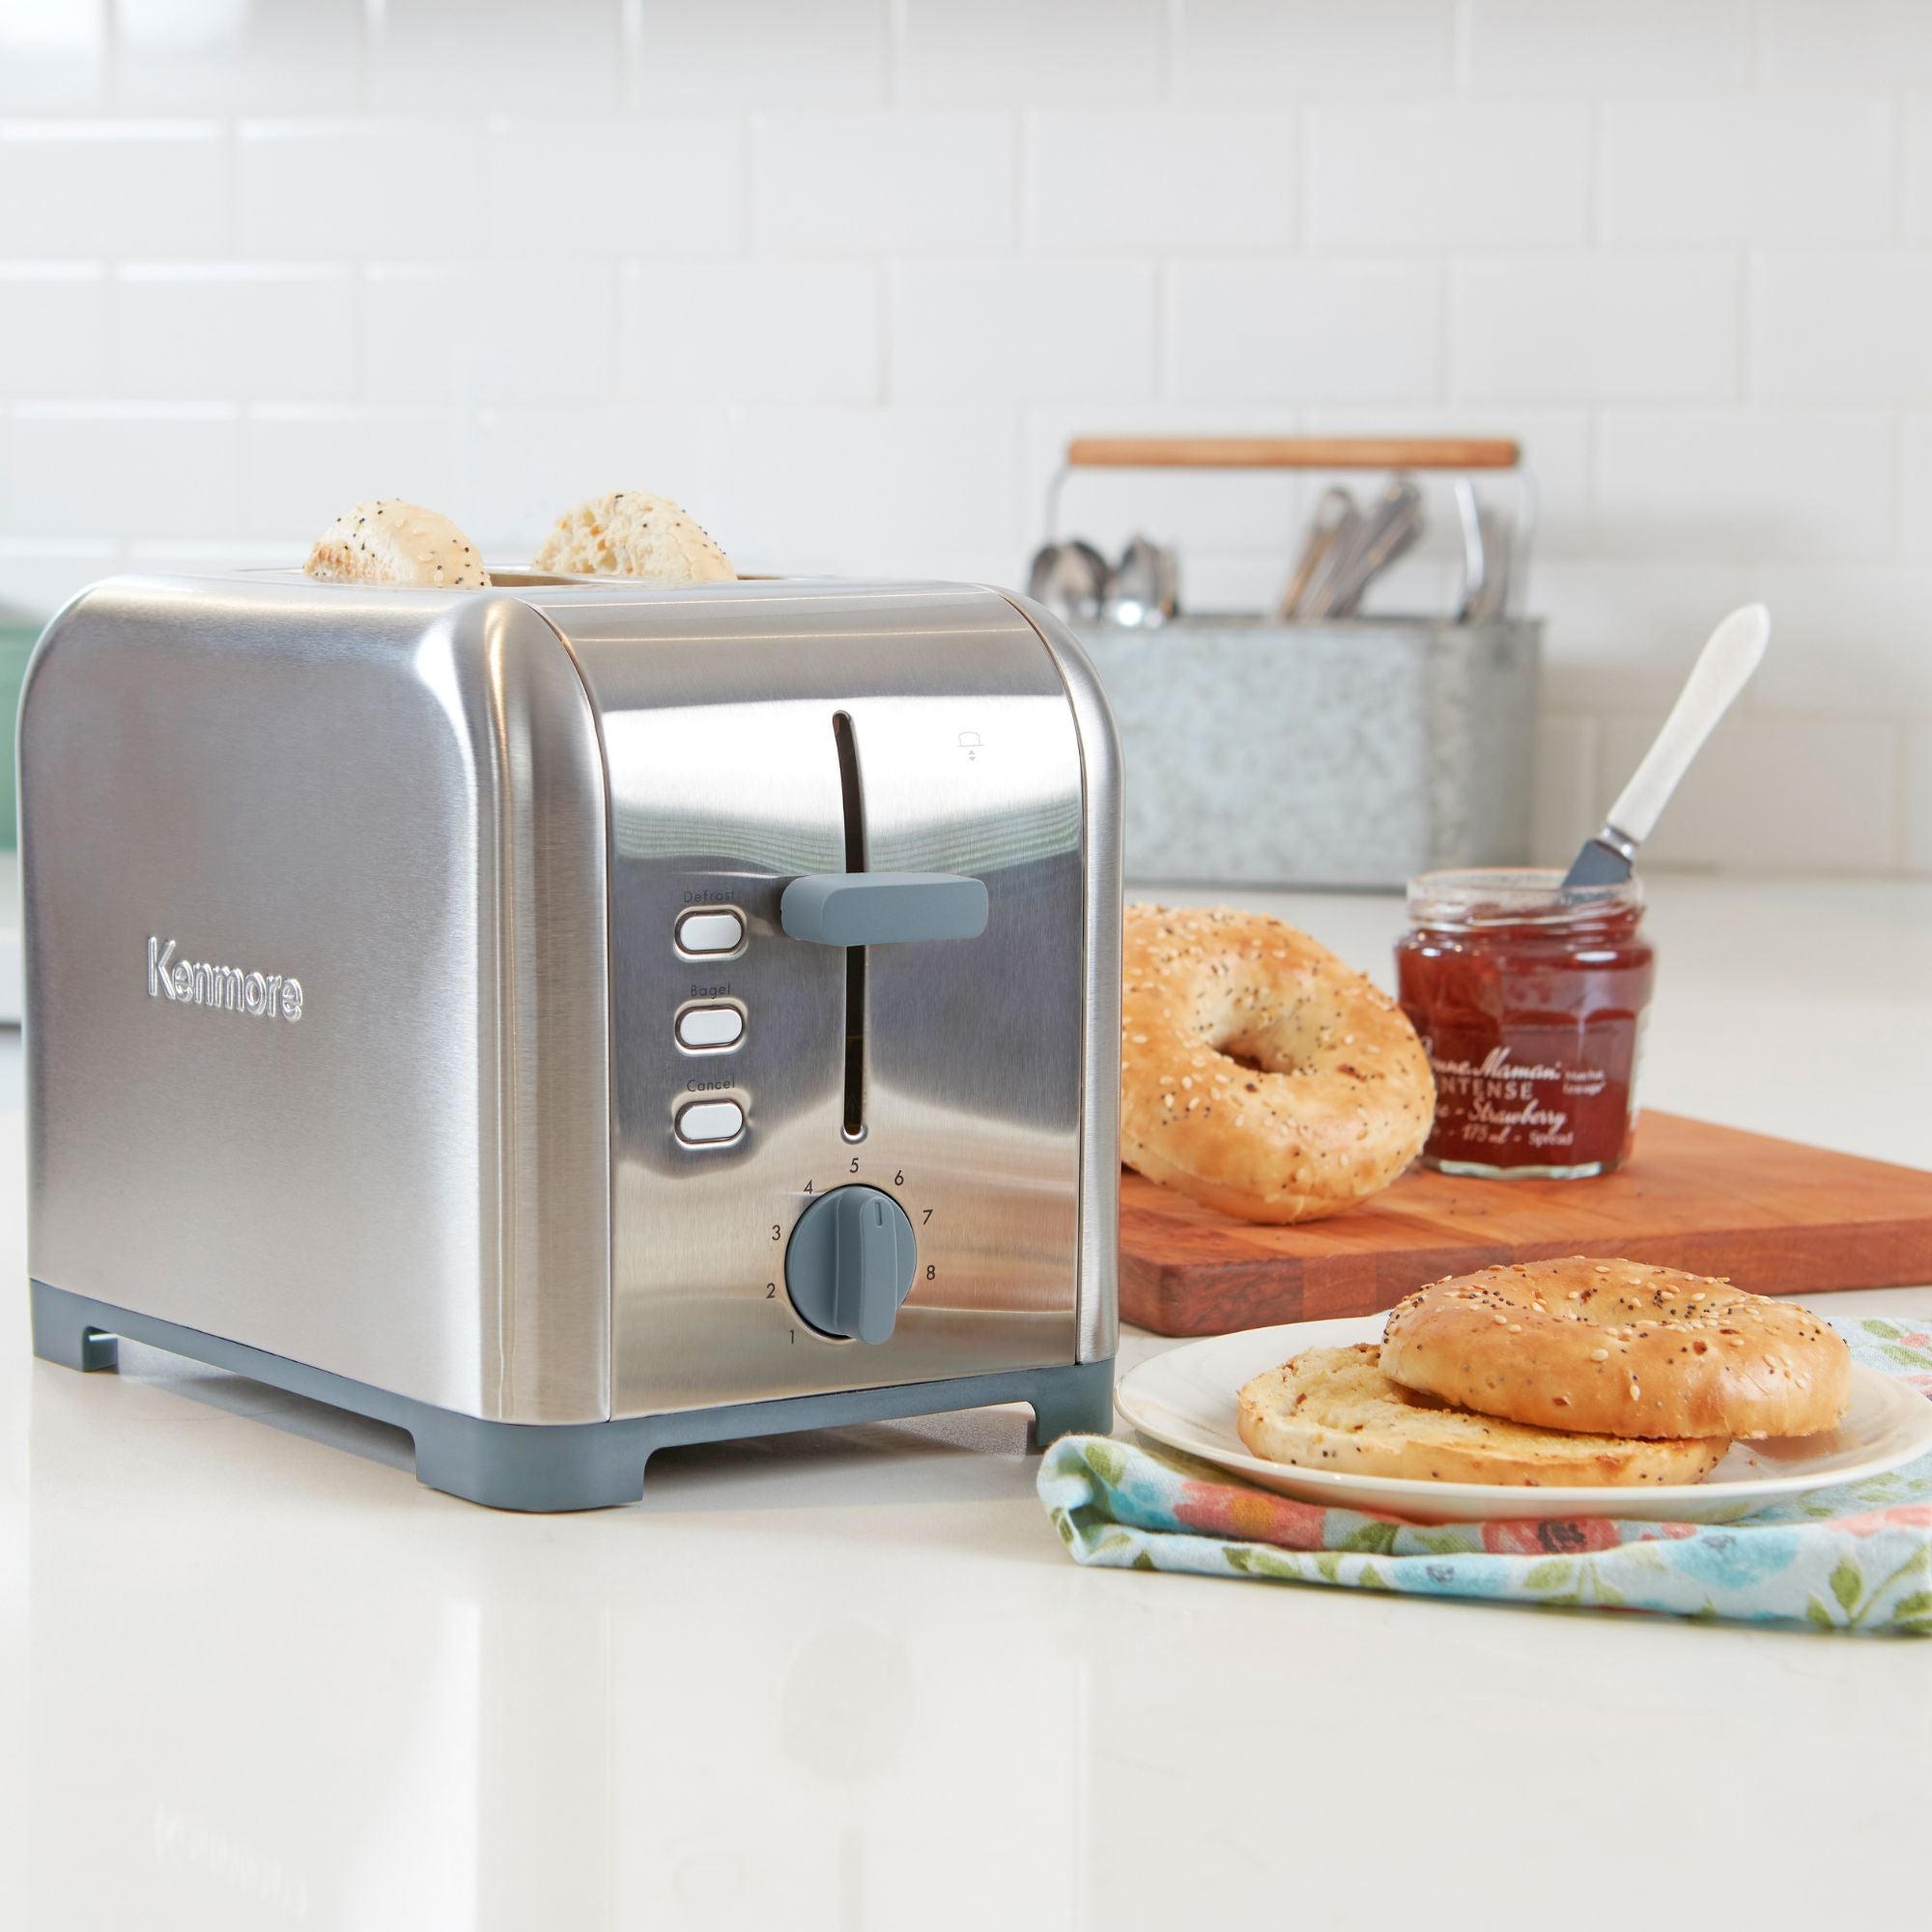 Kenmore 2-slice stainless steel toaster with toasted bagel slices inside on a light gray countertop with white tile backsplash behind. To the right of the toaster is a napkin and plate with toasted bagel and a wooden cutting board with uncut bagels and an open jam jar.